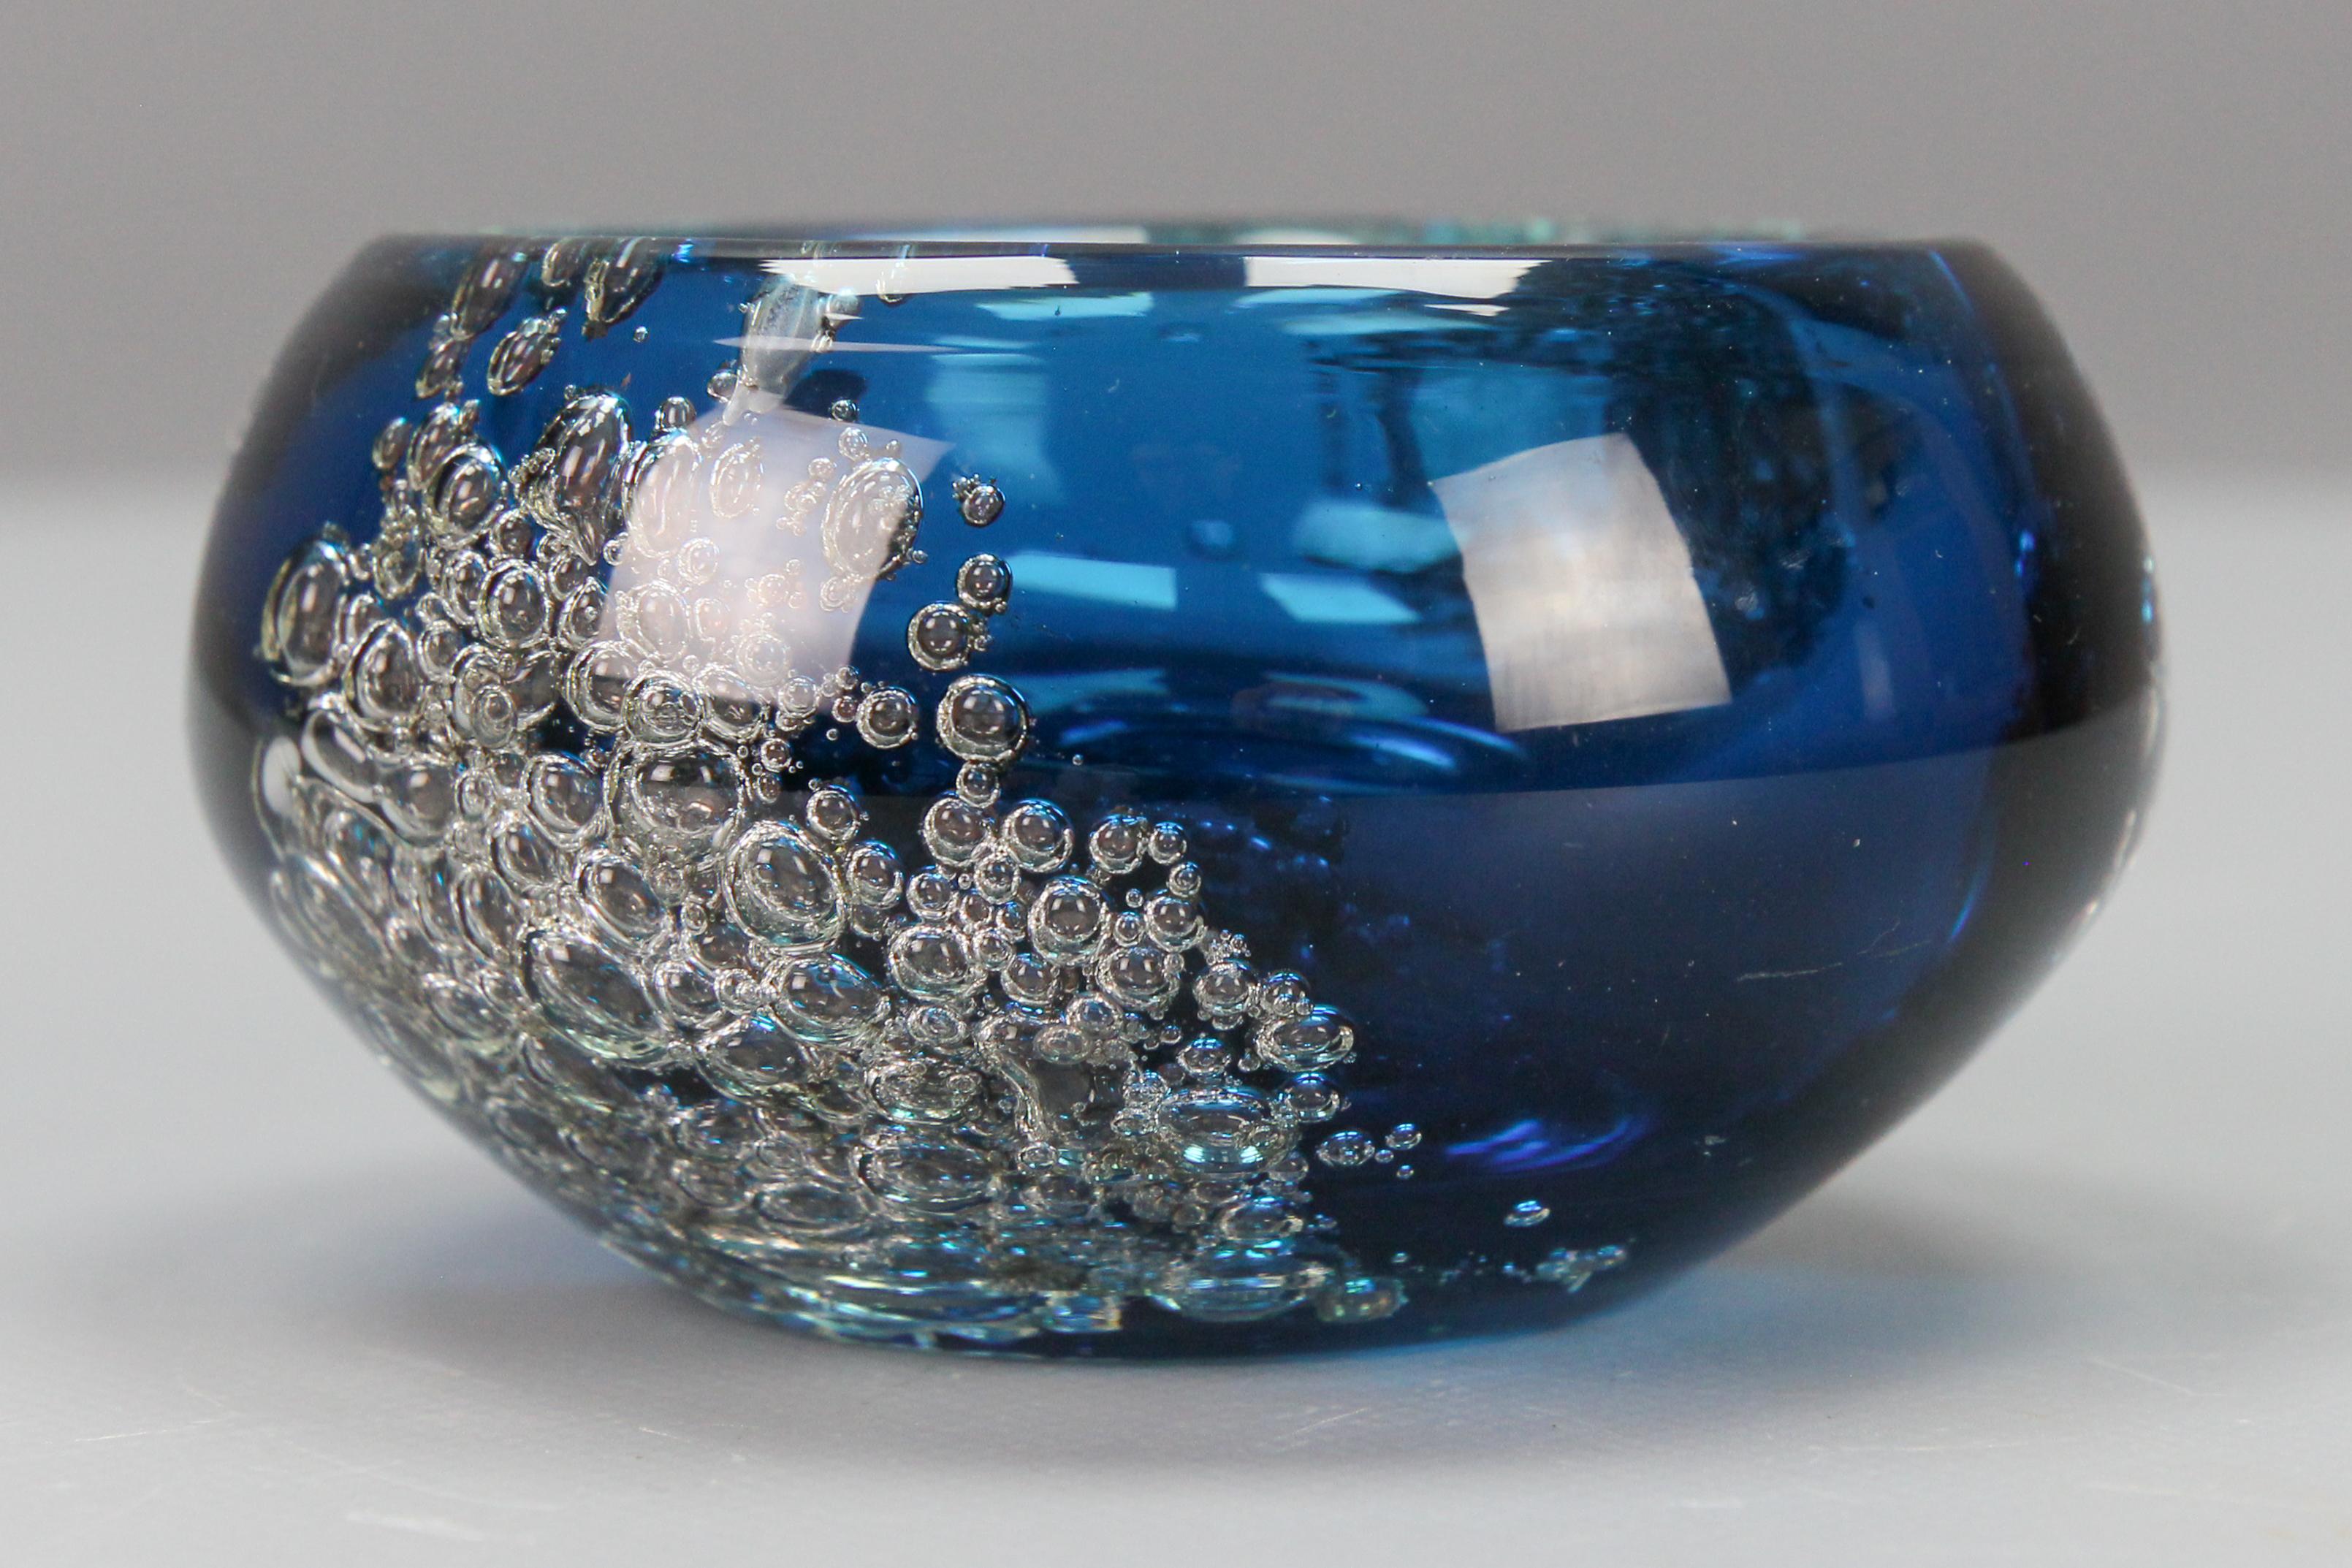 Small blue bubbled glass bowl by Zwiesel, Germany, 1970s.
An adorable and decorative blue glass bowl with a beautiful inclusion of bubbles. 
In good condition with slight signs of aging.
Dimensions: height: 6 cm / 2.36 in; diameter: 10 cm / 3.93 in.